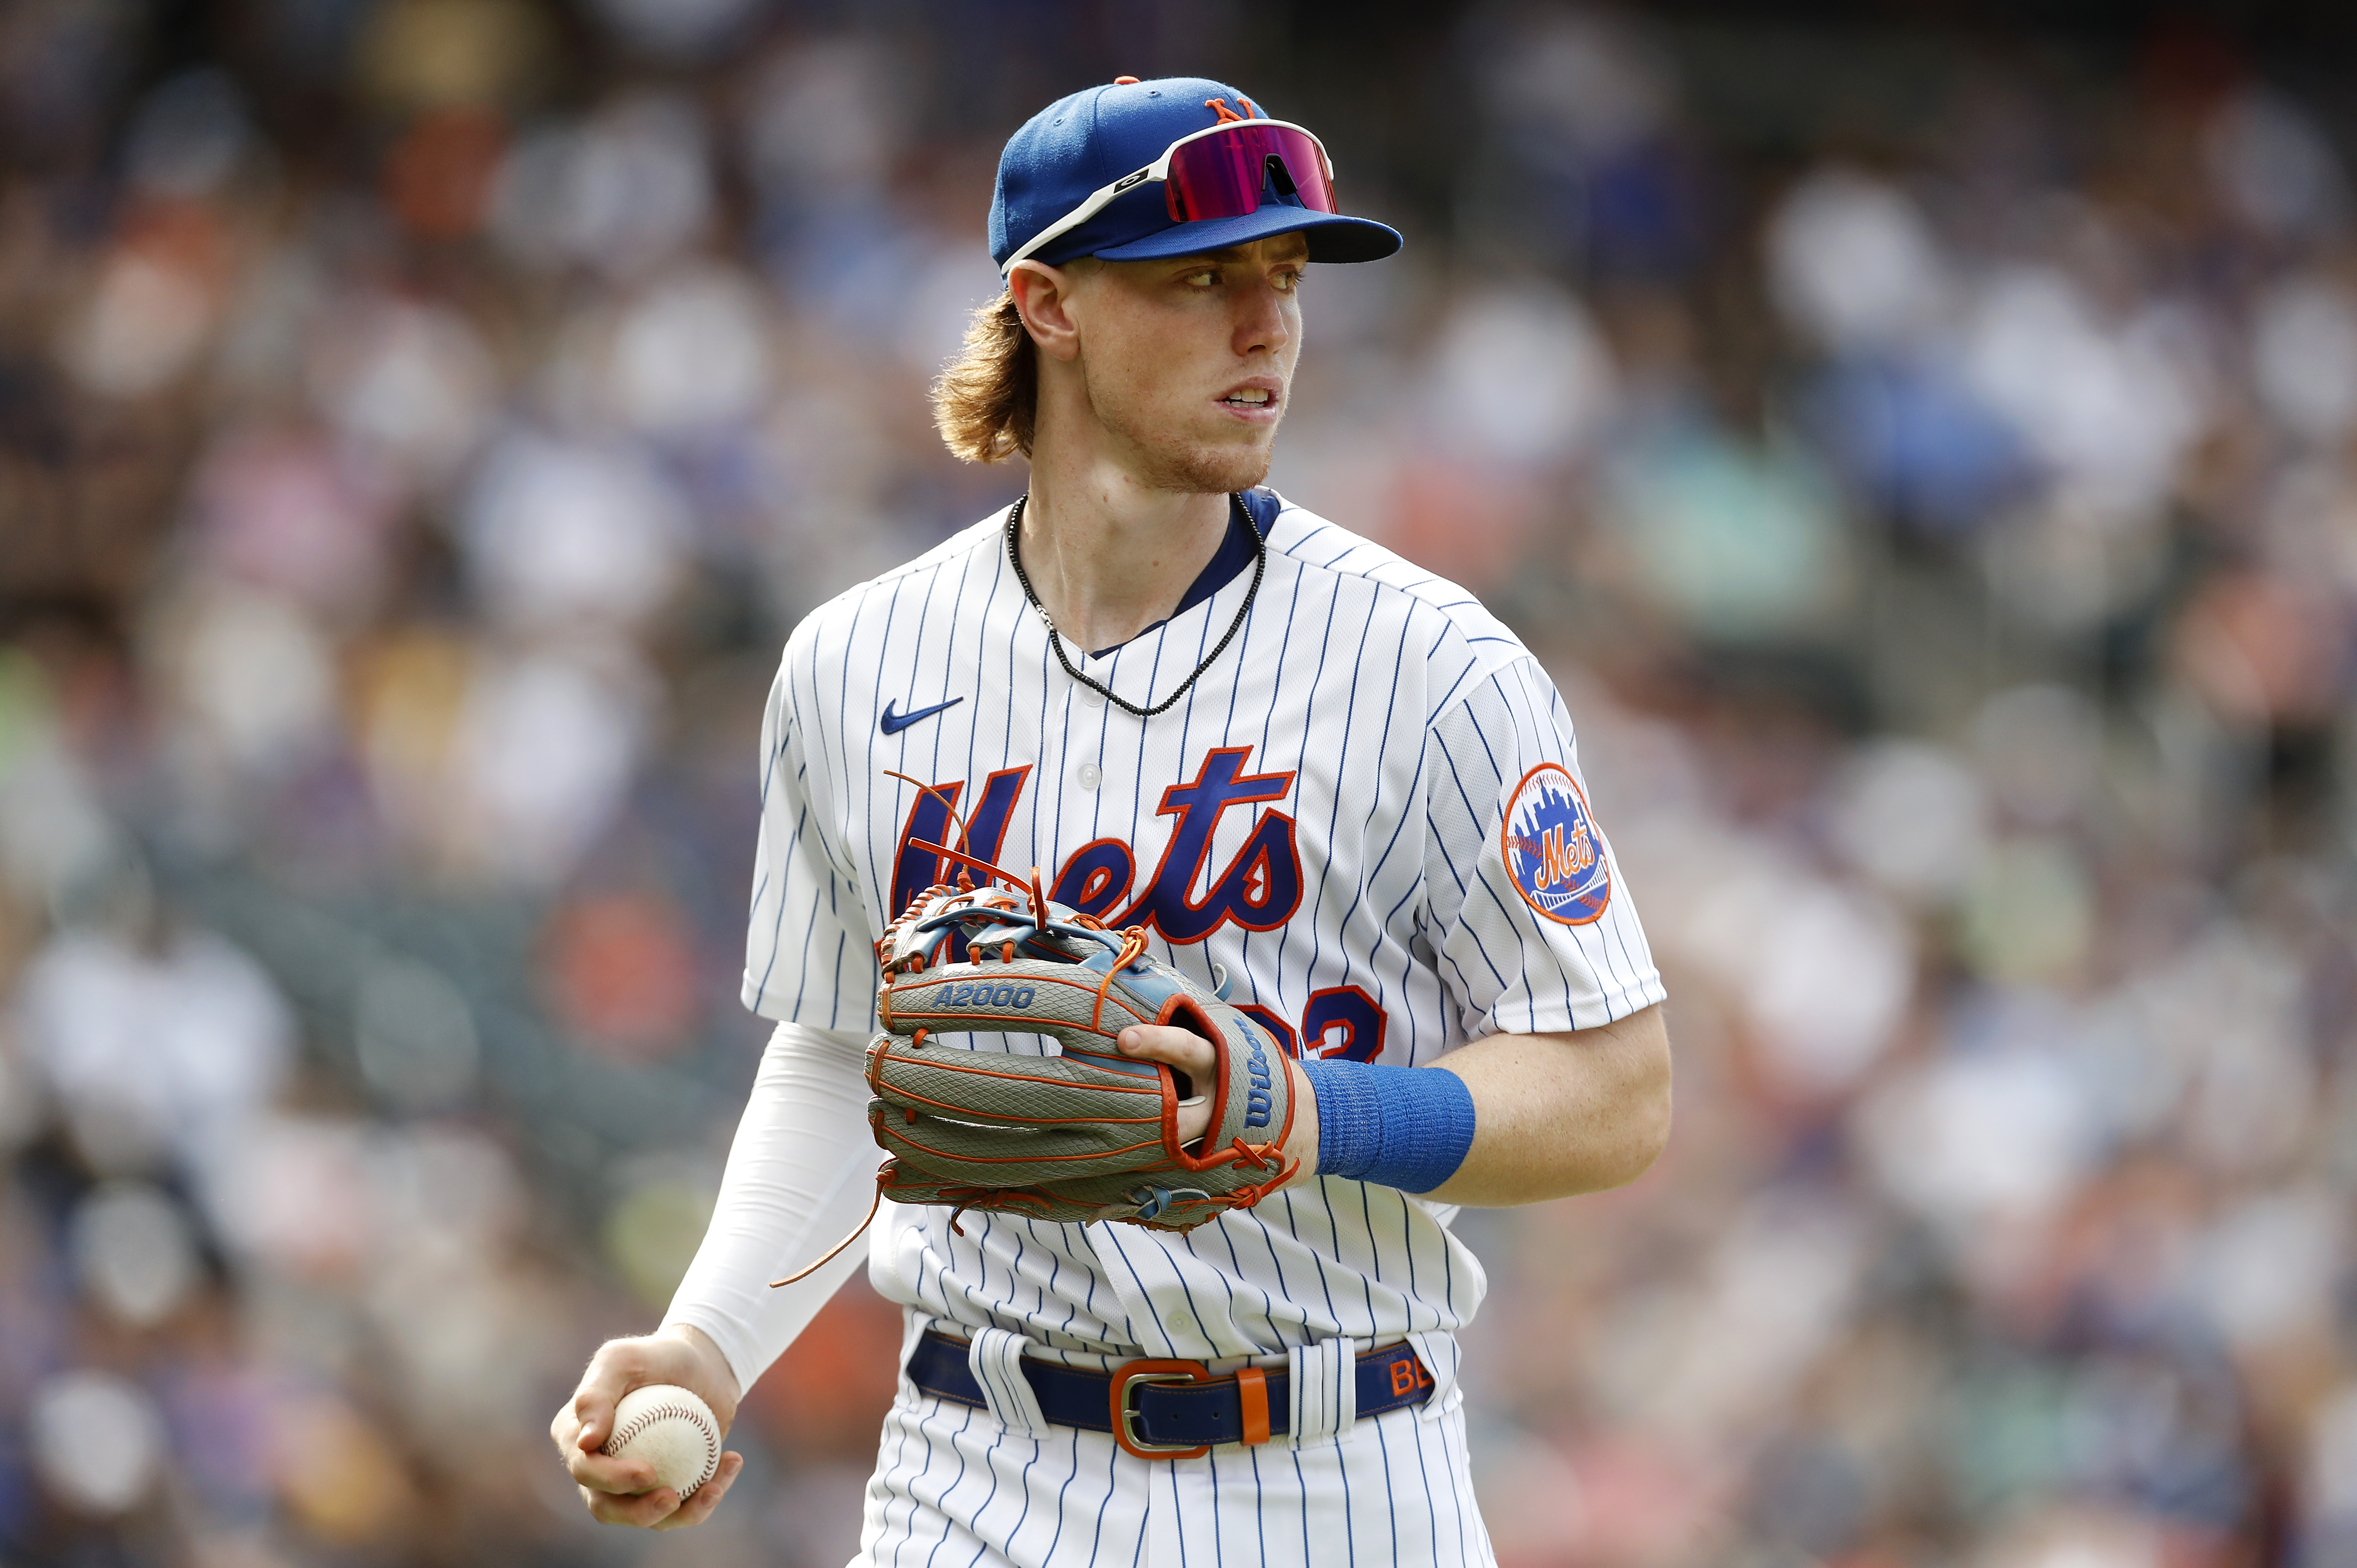 Mets' Brett Baty trying to adapt swing to get ball off ground